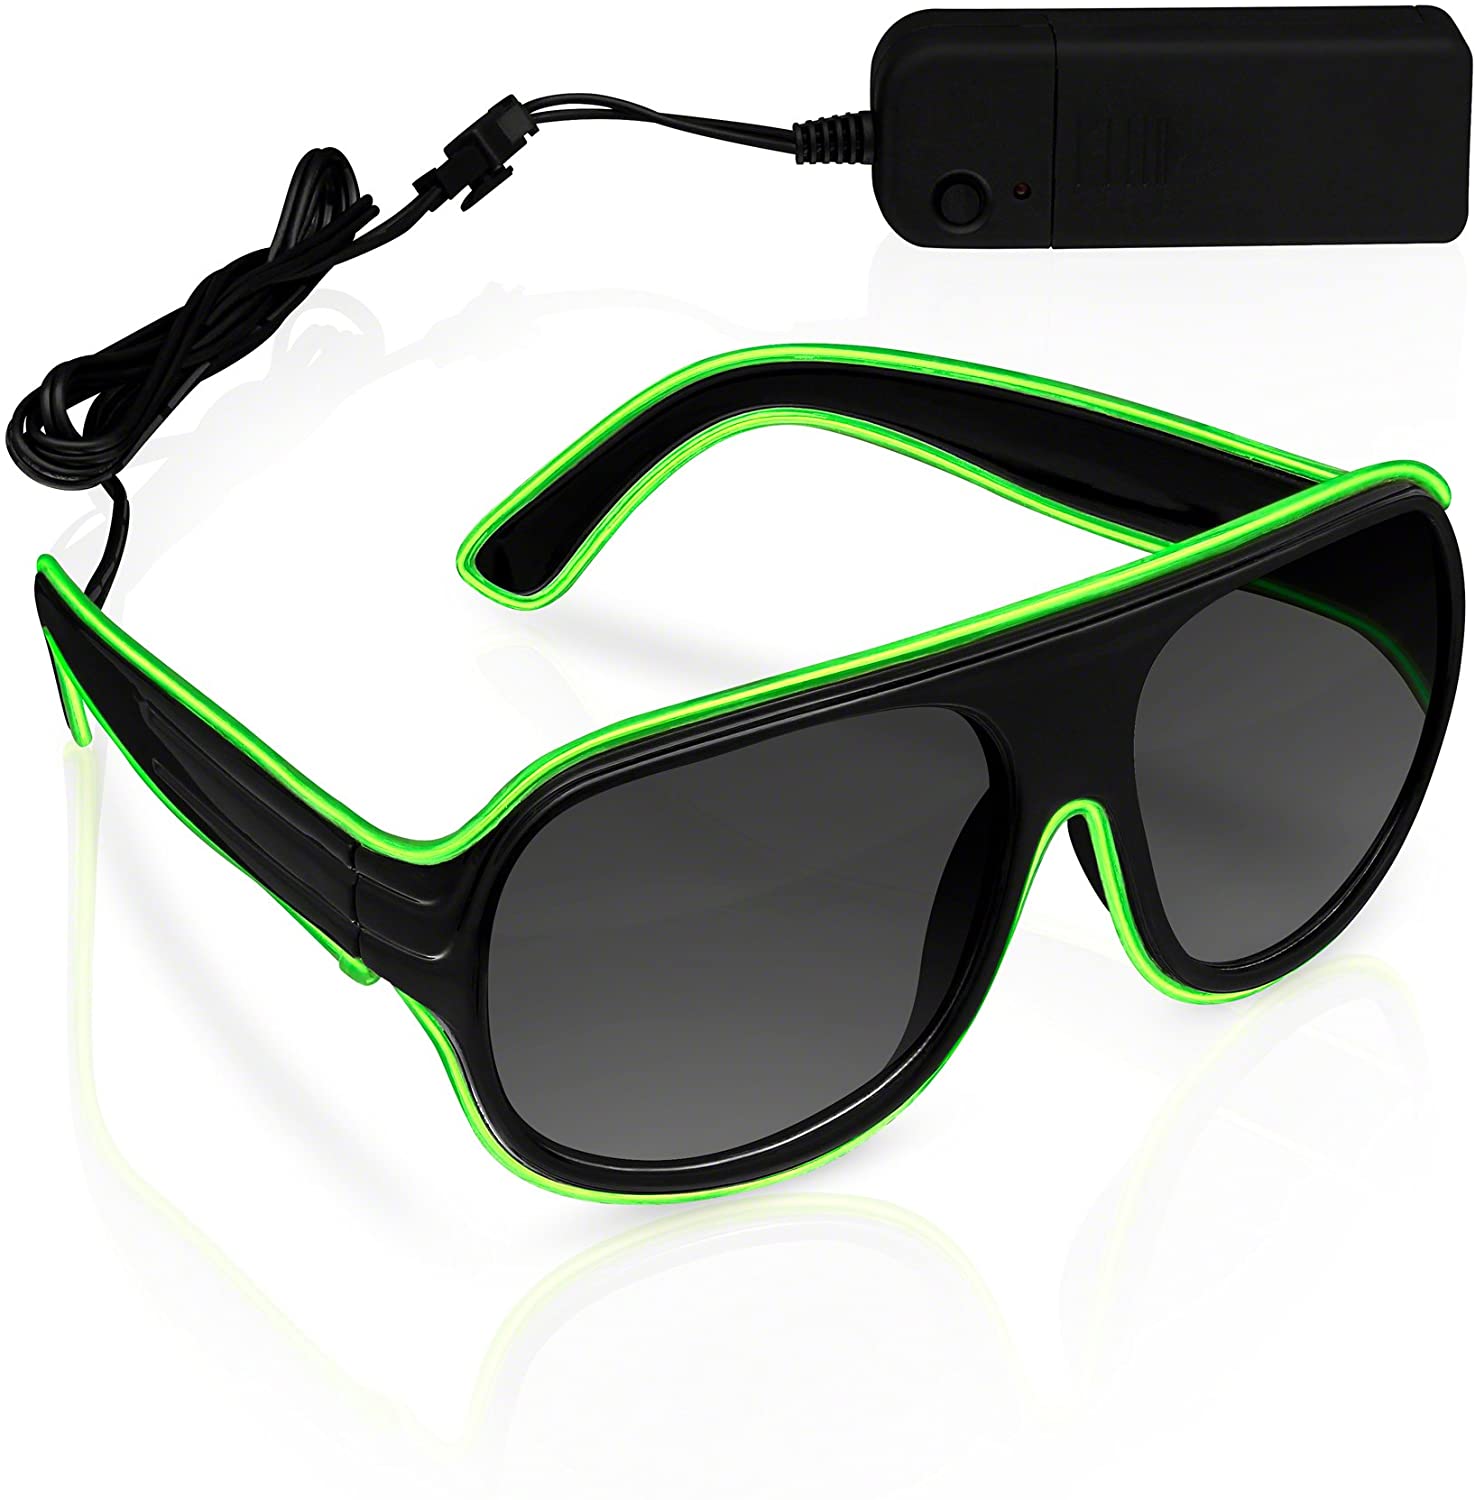 Electro Luminescent Banray Sunglasses Green All Products 3